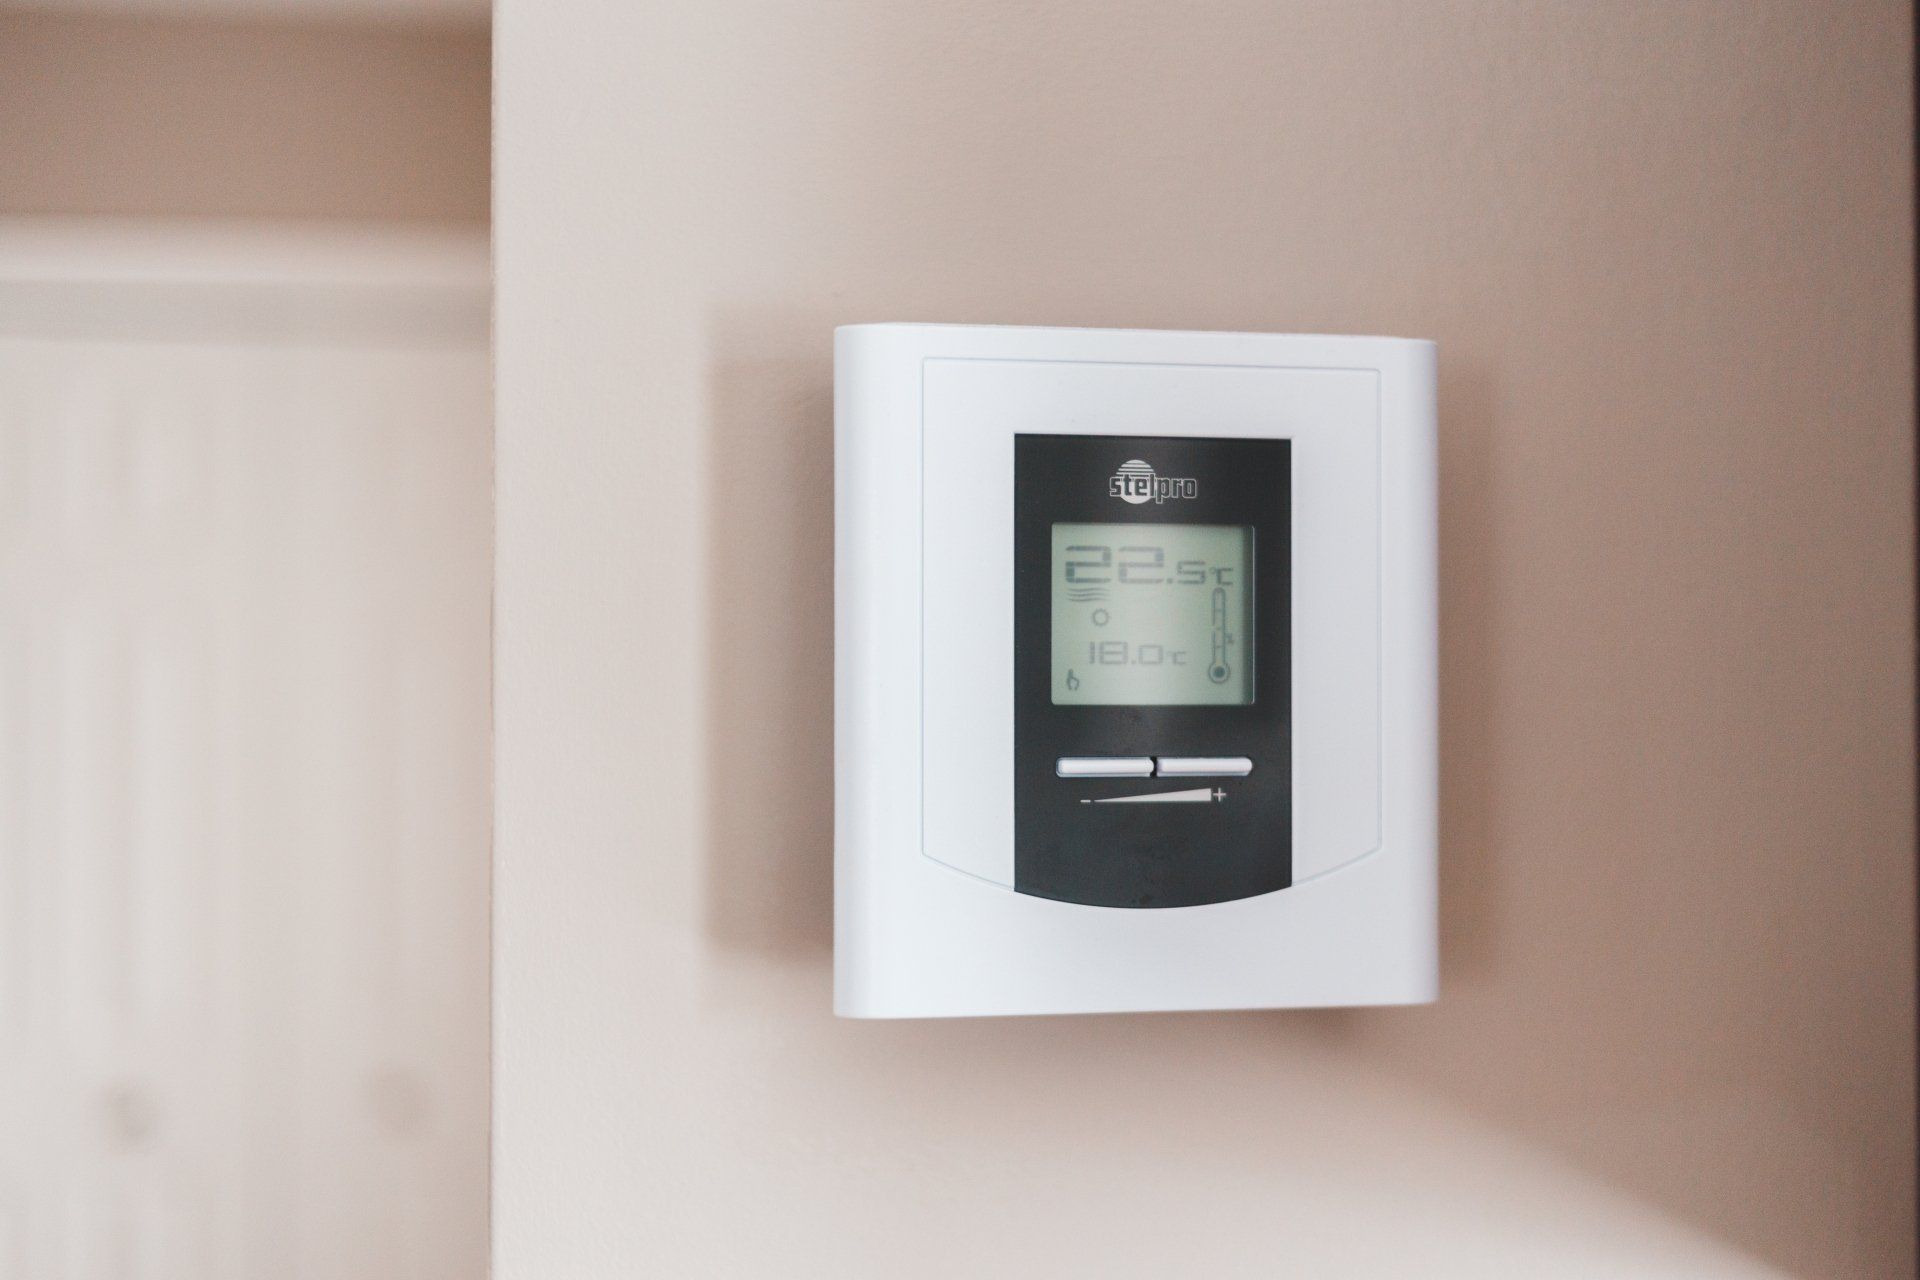 An image of a sleek and modern smart wall energy control thermostat.